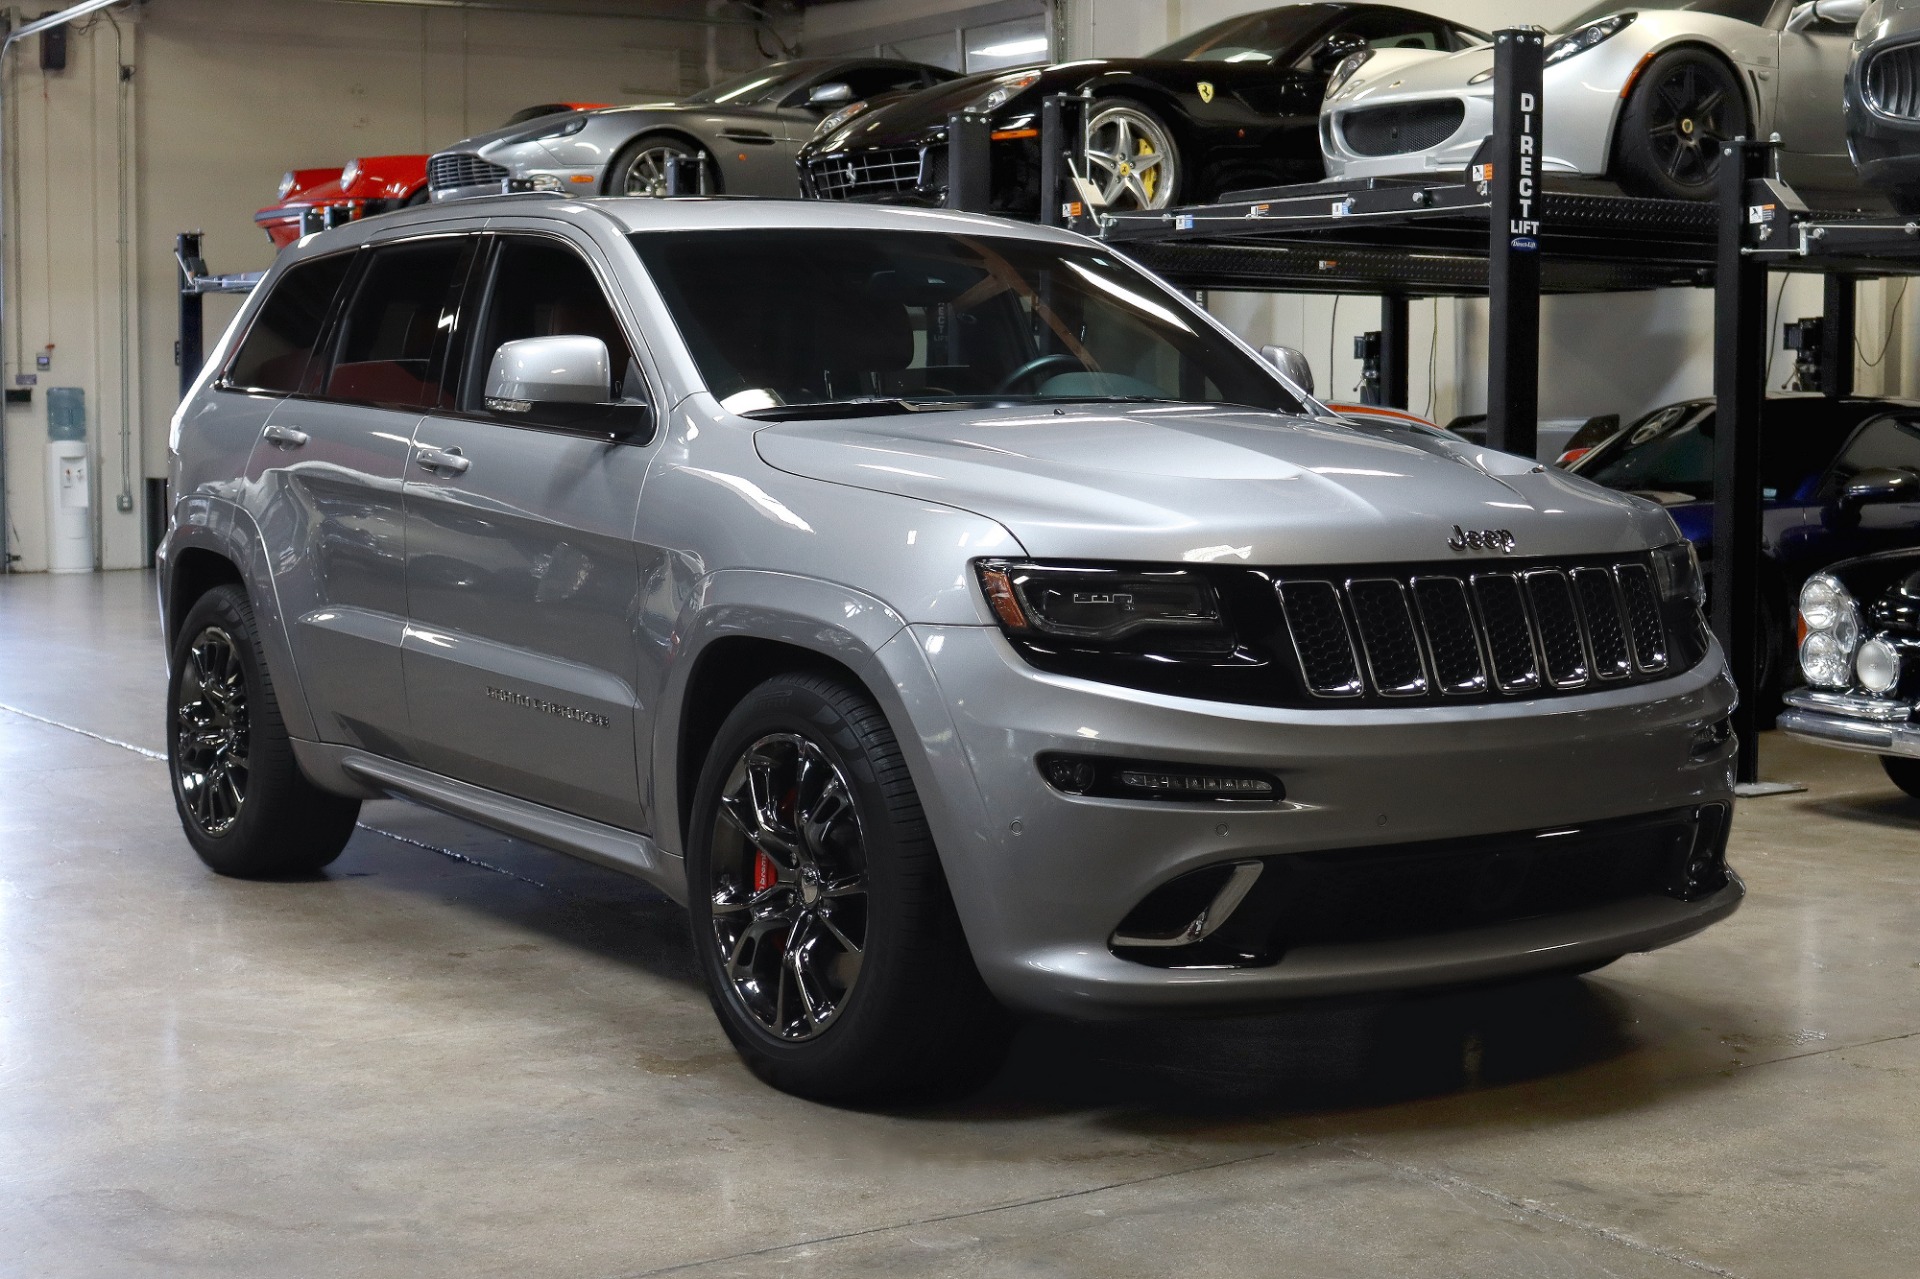 Used 2015 Jeep Grand Cherokee SRT for sale $55,995 at San Francisco Sports Cars in San Carlos CA 94070 1